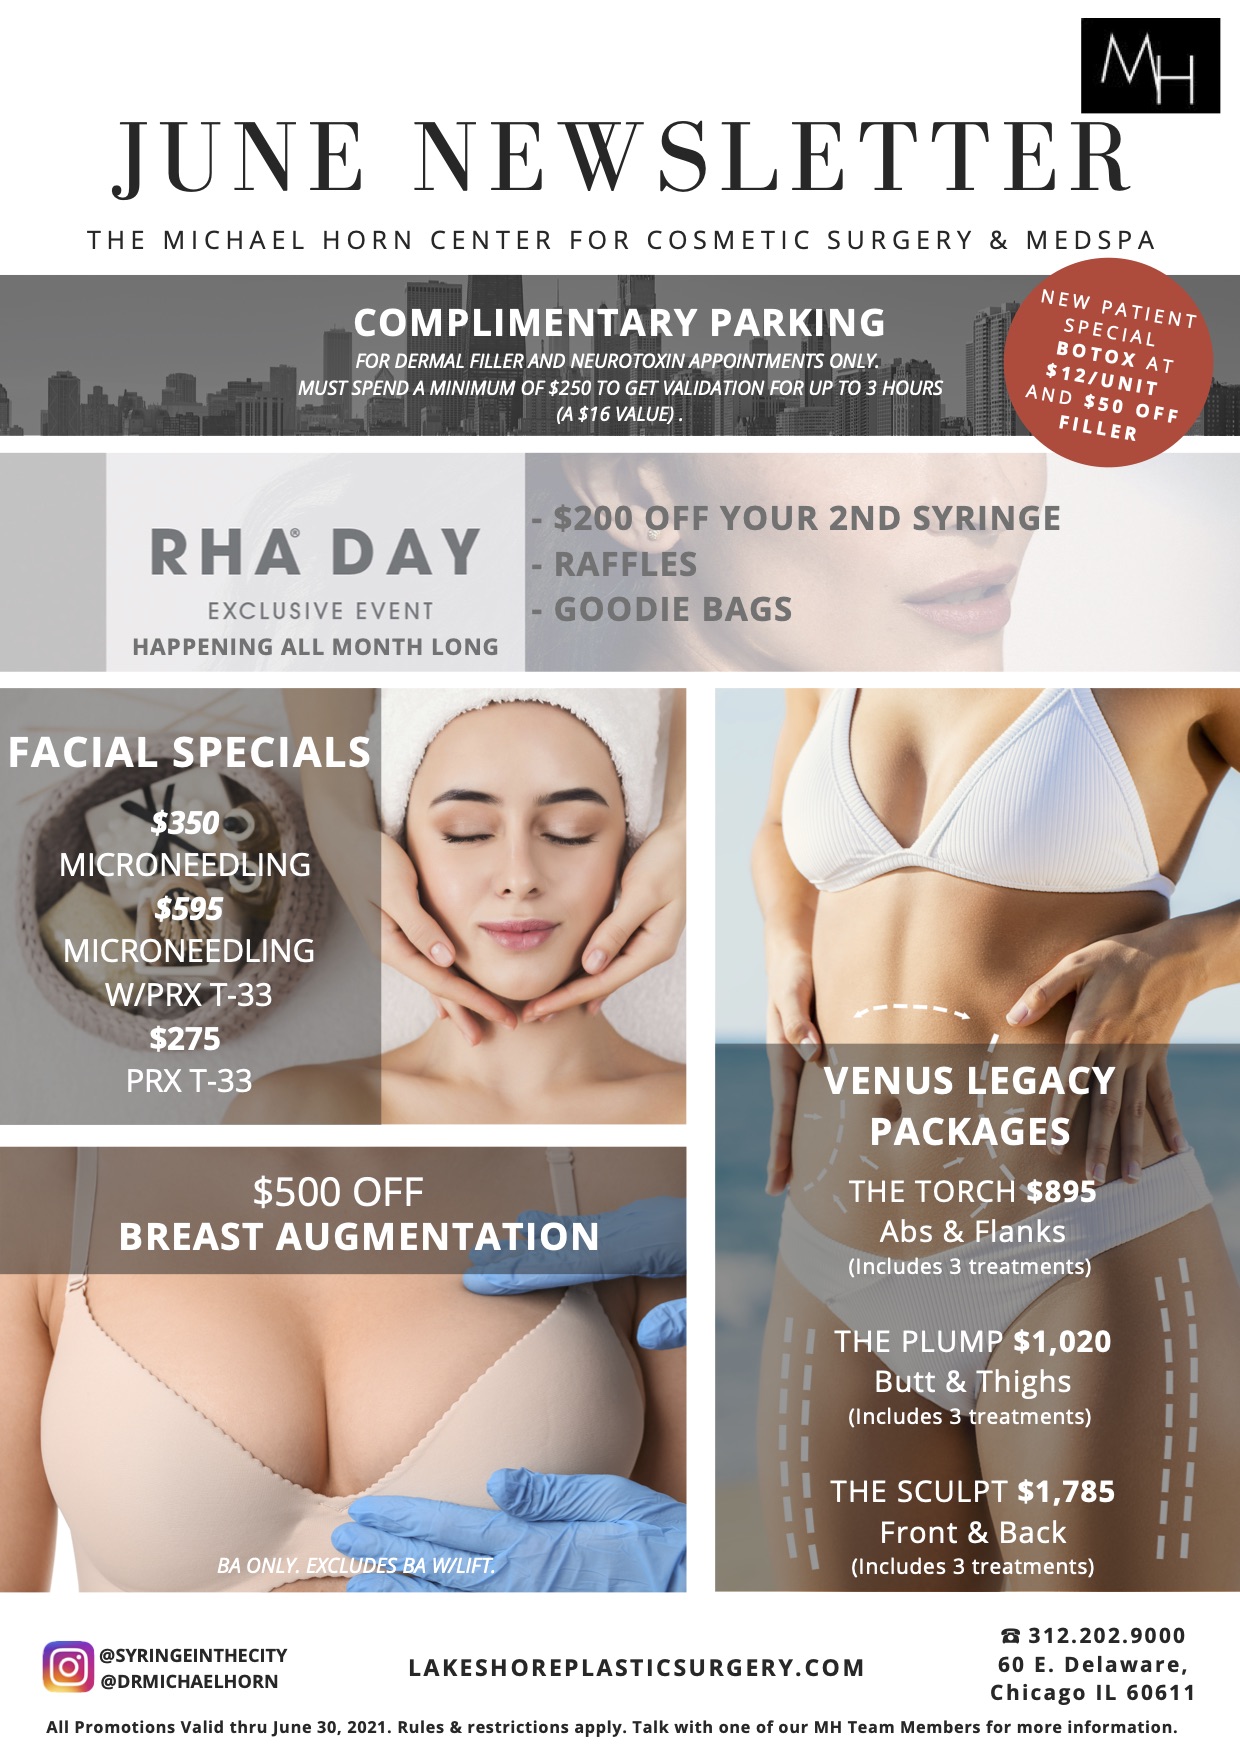 Michael Horn Center June Newsletter:
            COMPLIMENTARY PARKING FOR DERMAL FILLER AND NEUROTOXIN APPOINTMENTS ONLY.
            MUST SPEND A MINIMUM OF $250 TO GET VALIDATION FOR UP TO 3 HOURS (A $16 VALUE).
            
            NEW PATIENT SPECIAL BOTOX AT $12/UNIT AND $50 OFF FILLER 
            
            RHA DAY EXCLUSIVE EVENT HAPPENING ALL MONTH LONG
            $200 OFF YOUR 2ND SYRINGE
            RAFFLES
            GOODIE BAGS
           
            FACIAL SPECIALS
            $350 MICRONEEDLING
            $595 MICRONEEDLING W/PRX T-33
            $275 PRX T-33
            
            $500 OFF BREAST AUGMENTATION (BA ONLY. EXCLUDES BA W/LIFT.)
            
            VENUS LEGACY PACKAGES
            THE TORCH $895 Abs & Flanks (Includes 3 treatments)
            THE PLUMP $1,020 Butt & Thighs (Includes 3 treatments)
            THE SCULPT $1,785 Front & Back (Includes 3 treatments)
            
            All Promotions Valid thru June 30, 2021. Rules & restrictions apply. Talk with one of our MH Team Members for more information.